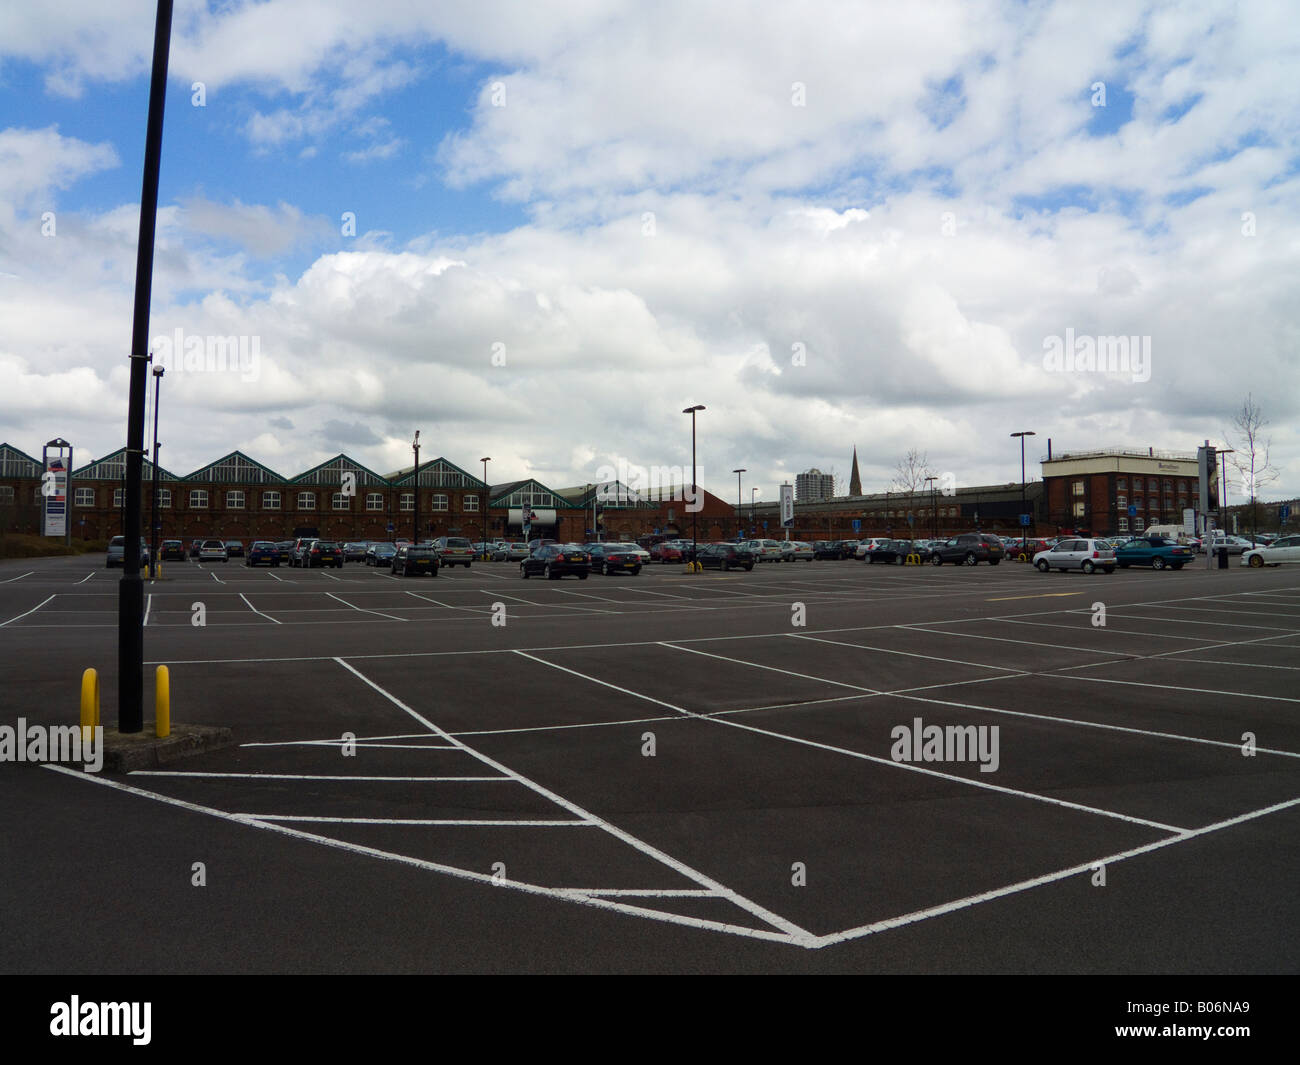 The car park at the Macarthur Glen shopping outlet in Swindon England UK Stock Photo